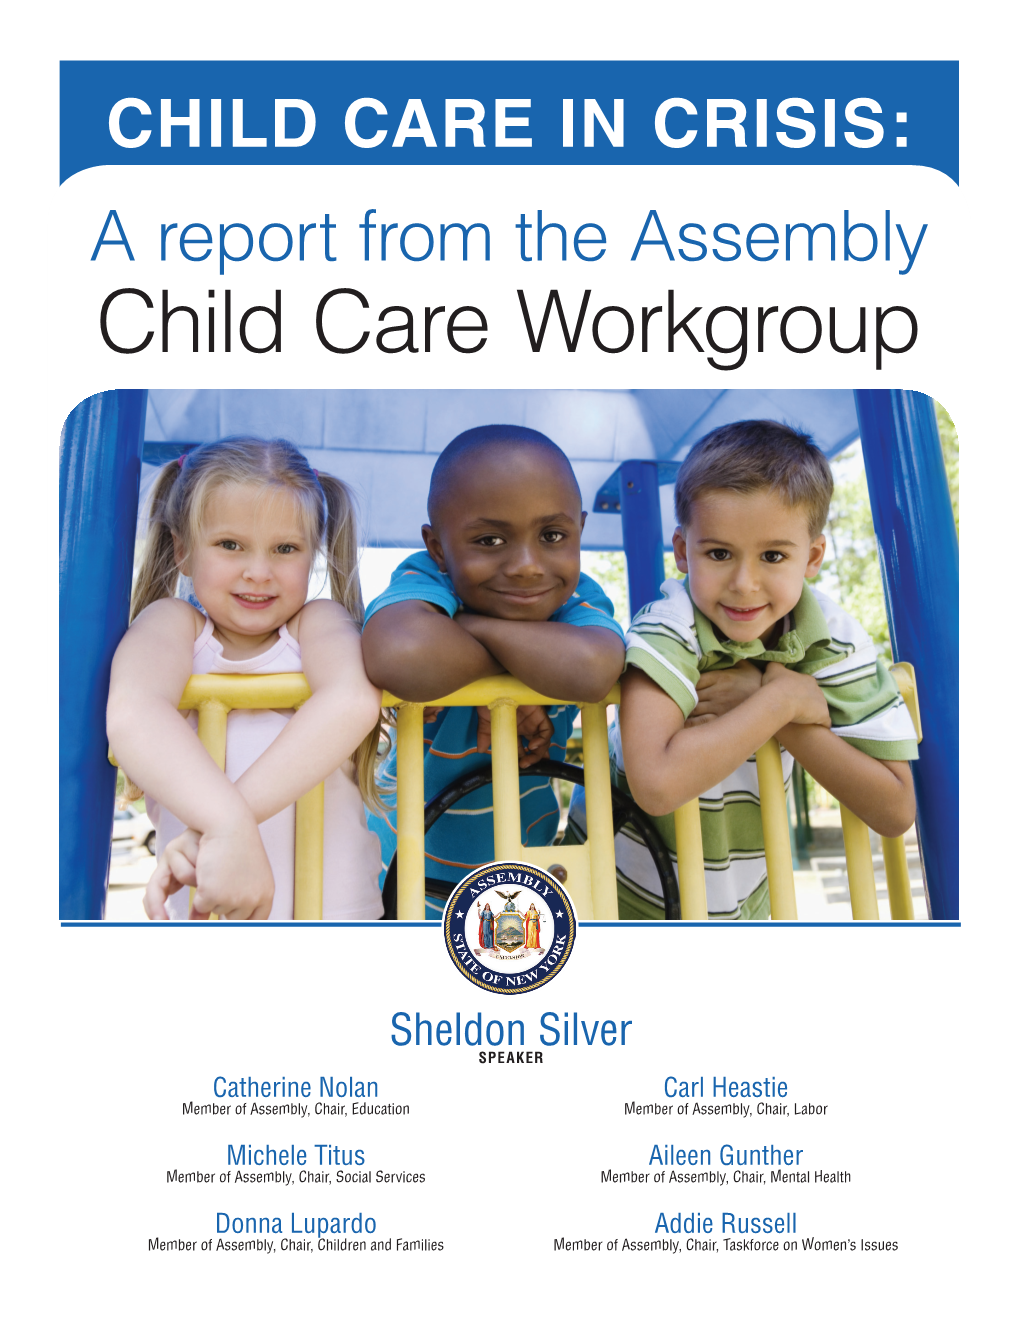 Child Care Workgroup